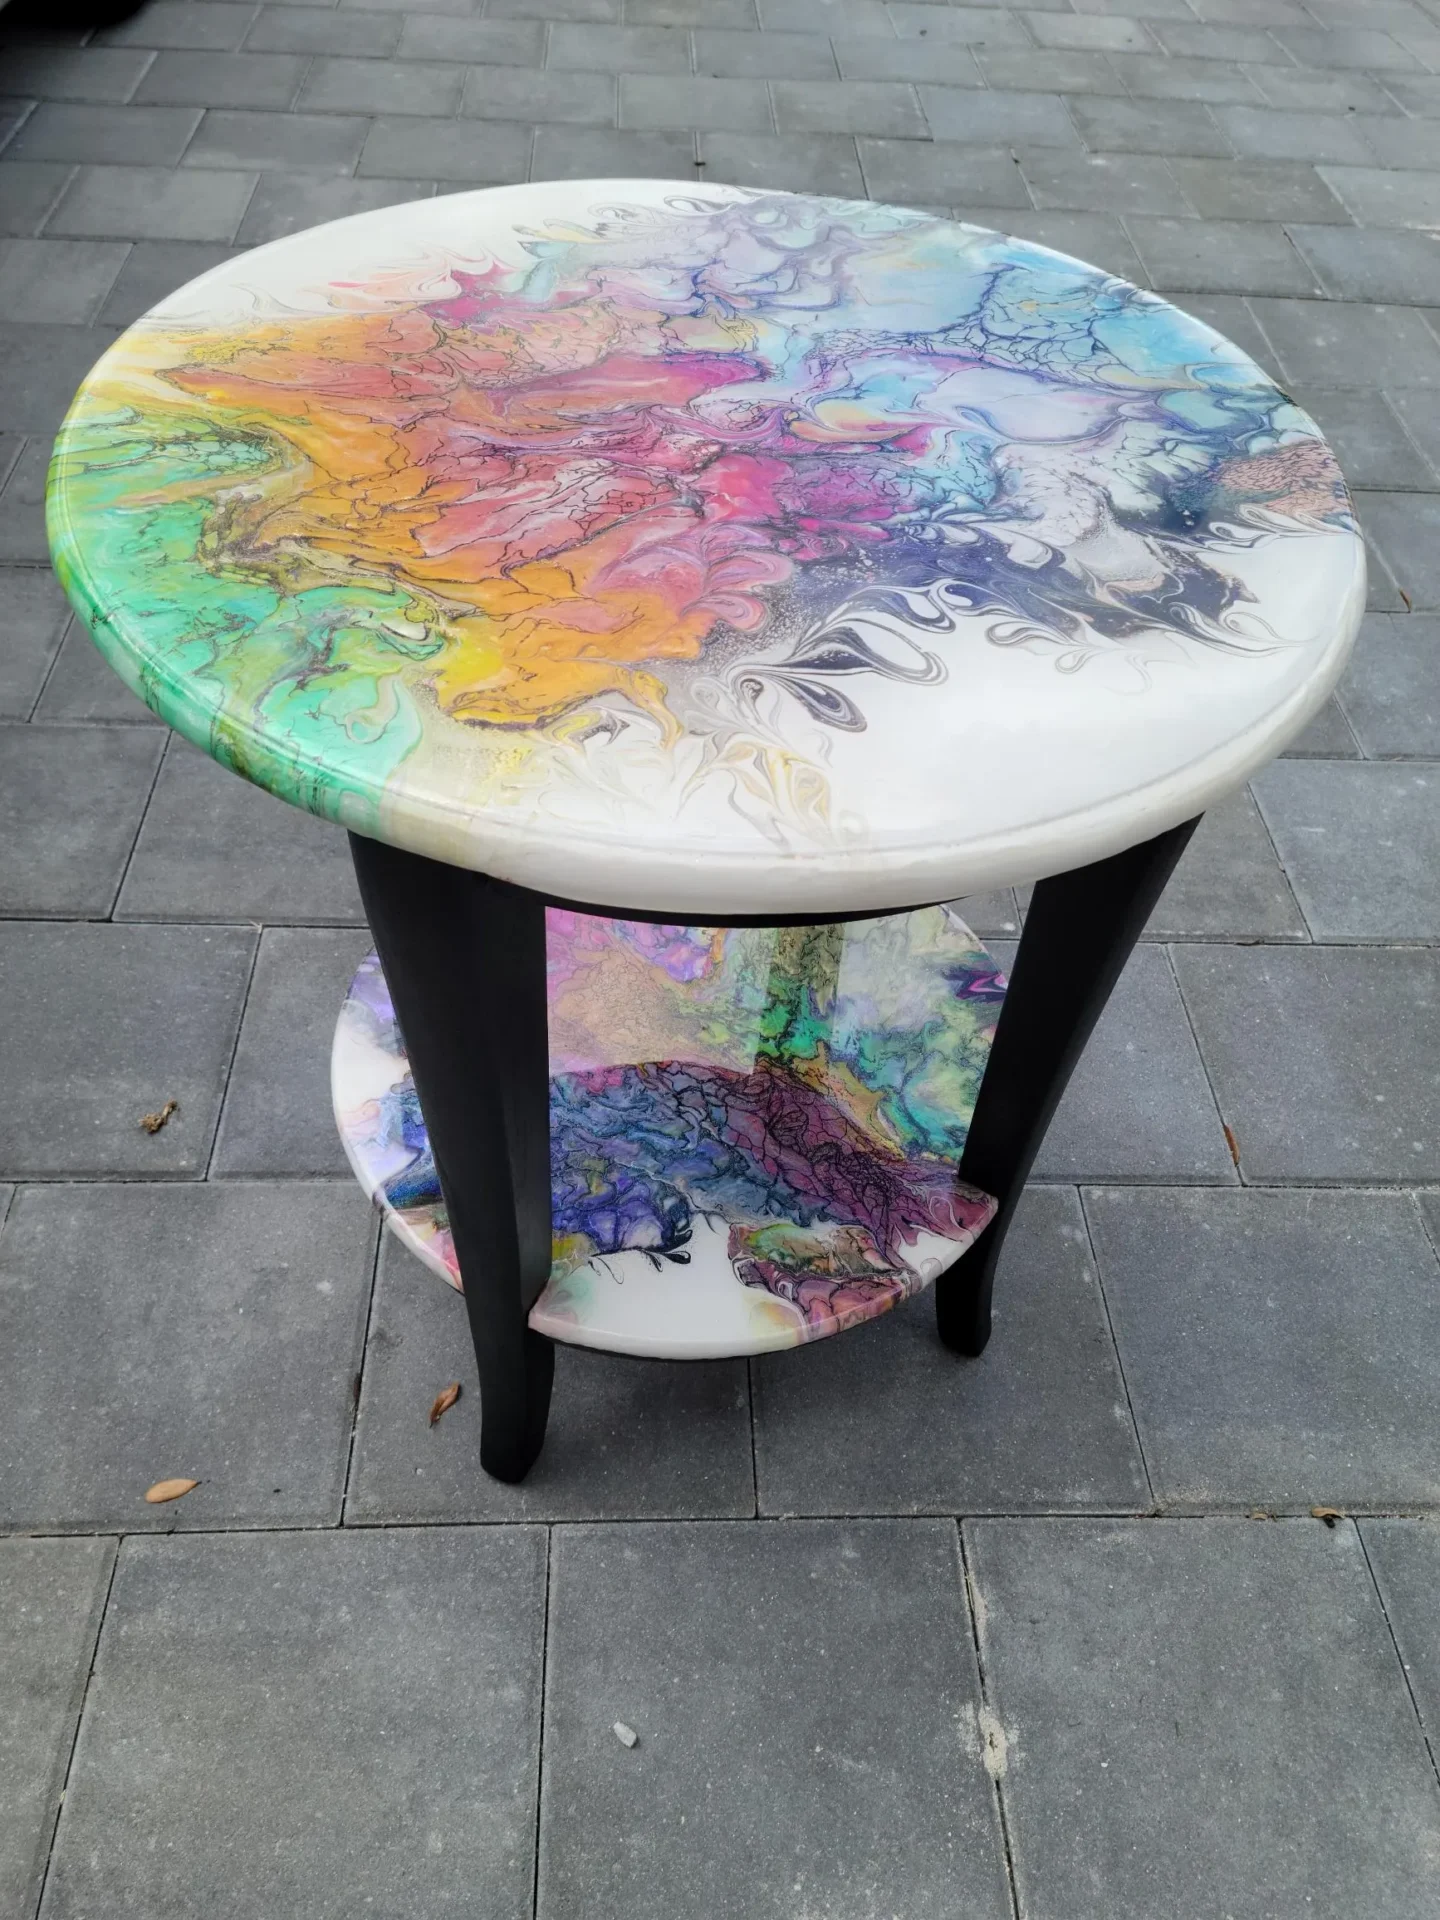 A table with a colorful design on it